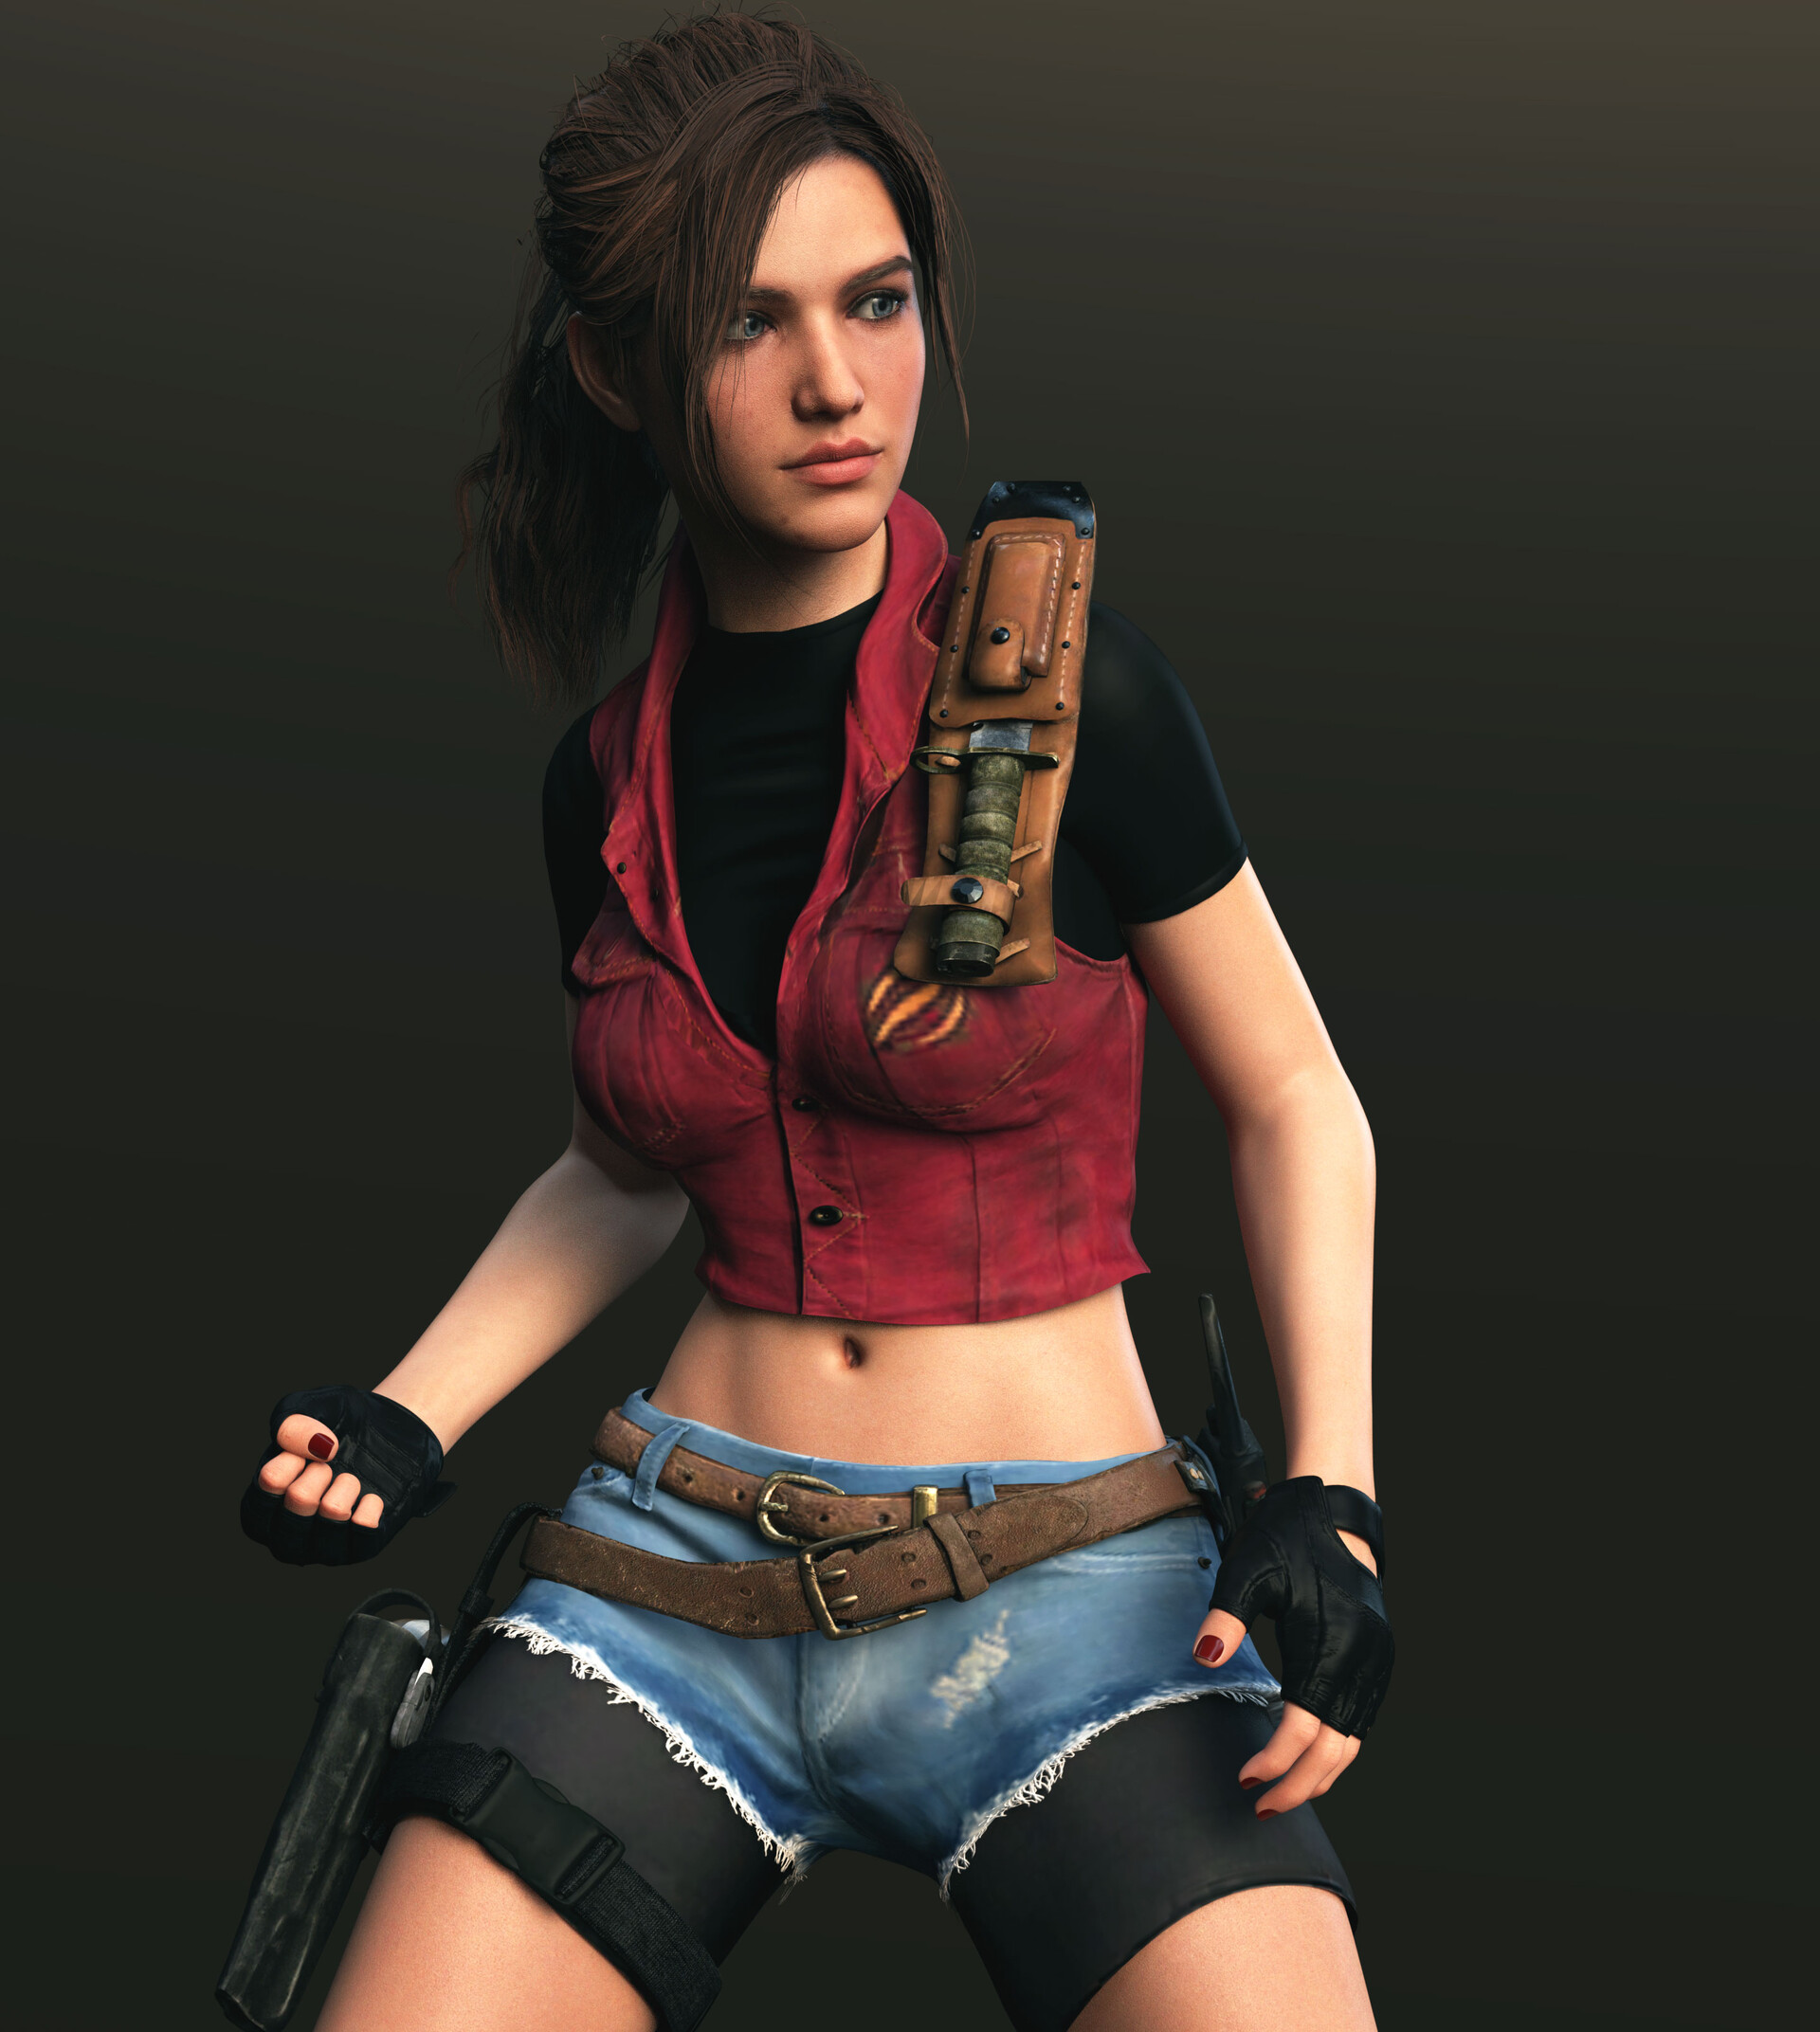 Claire Redfield'-